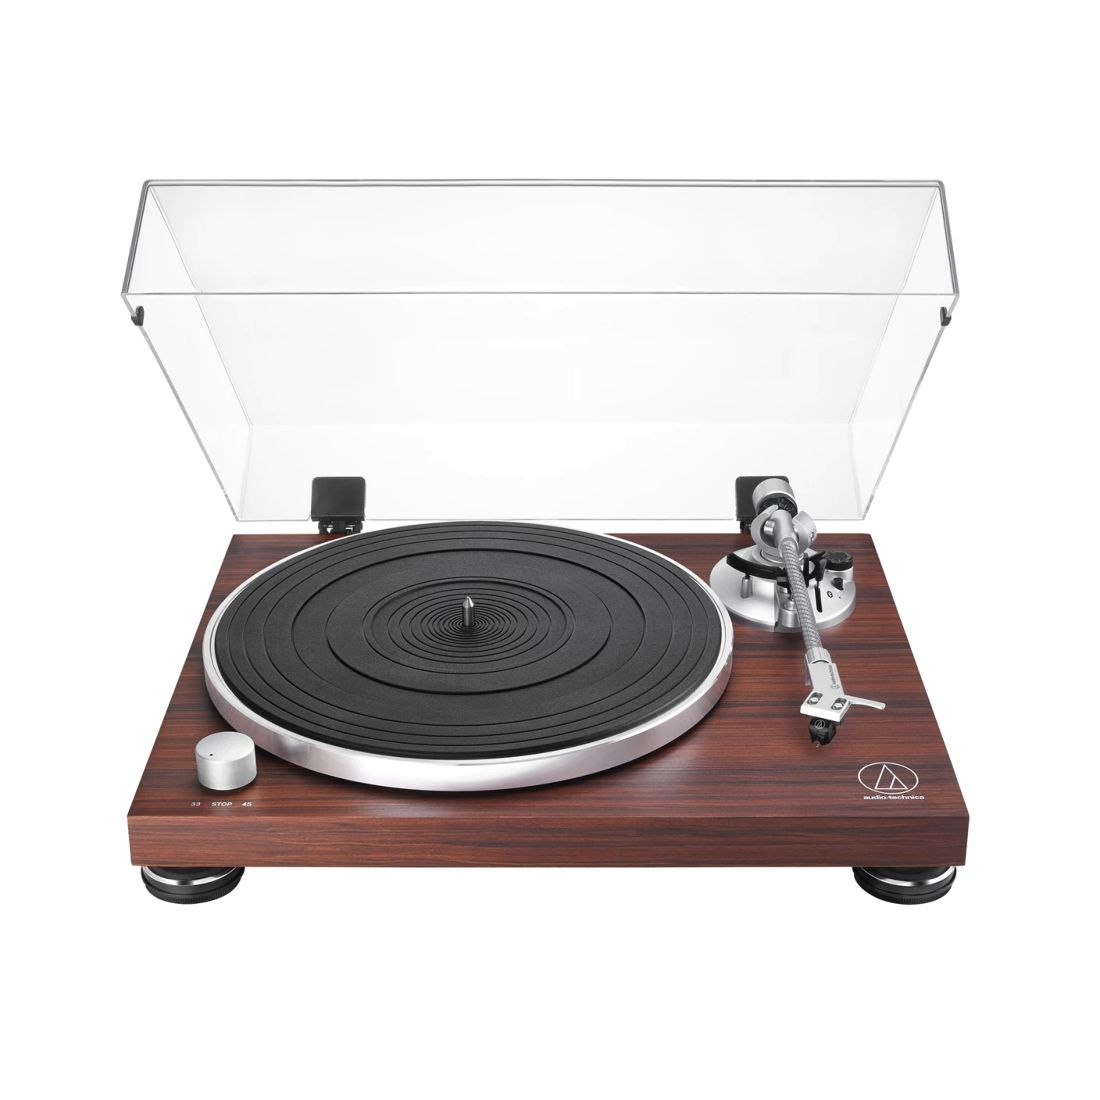 Audio Technica AT-LPW50BT-RW Bluetooth Manual Belt-Drive Turntable with Built-in Switchable Phono Pre-Amplifier & AT-VM95 Dual Moving Magnet Phono Cartridge - Brown